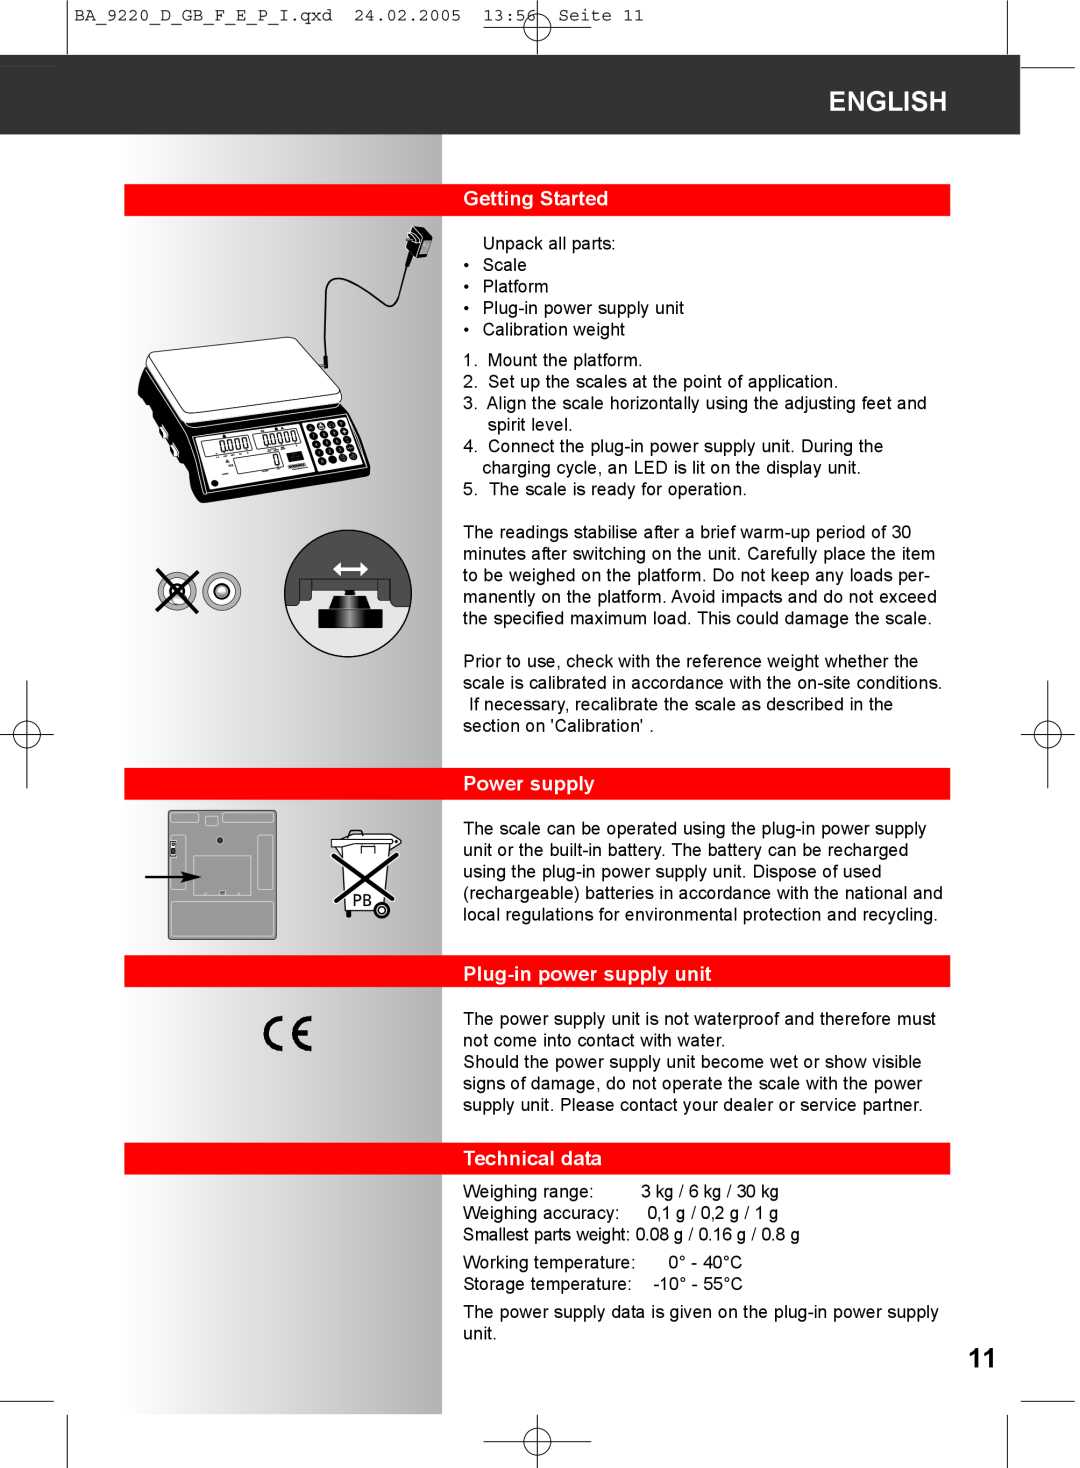 Soehnle 9220 manual Getting Started, Power supply, Plug-in power supply unit, Technical data, English 